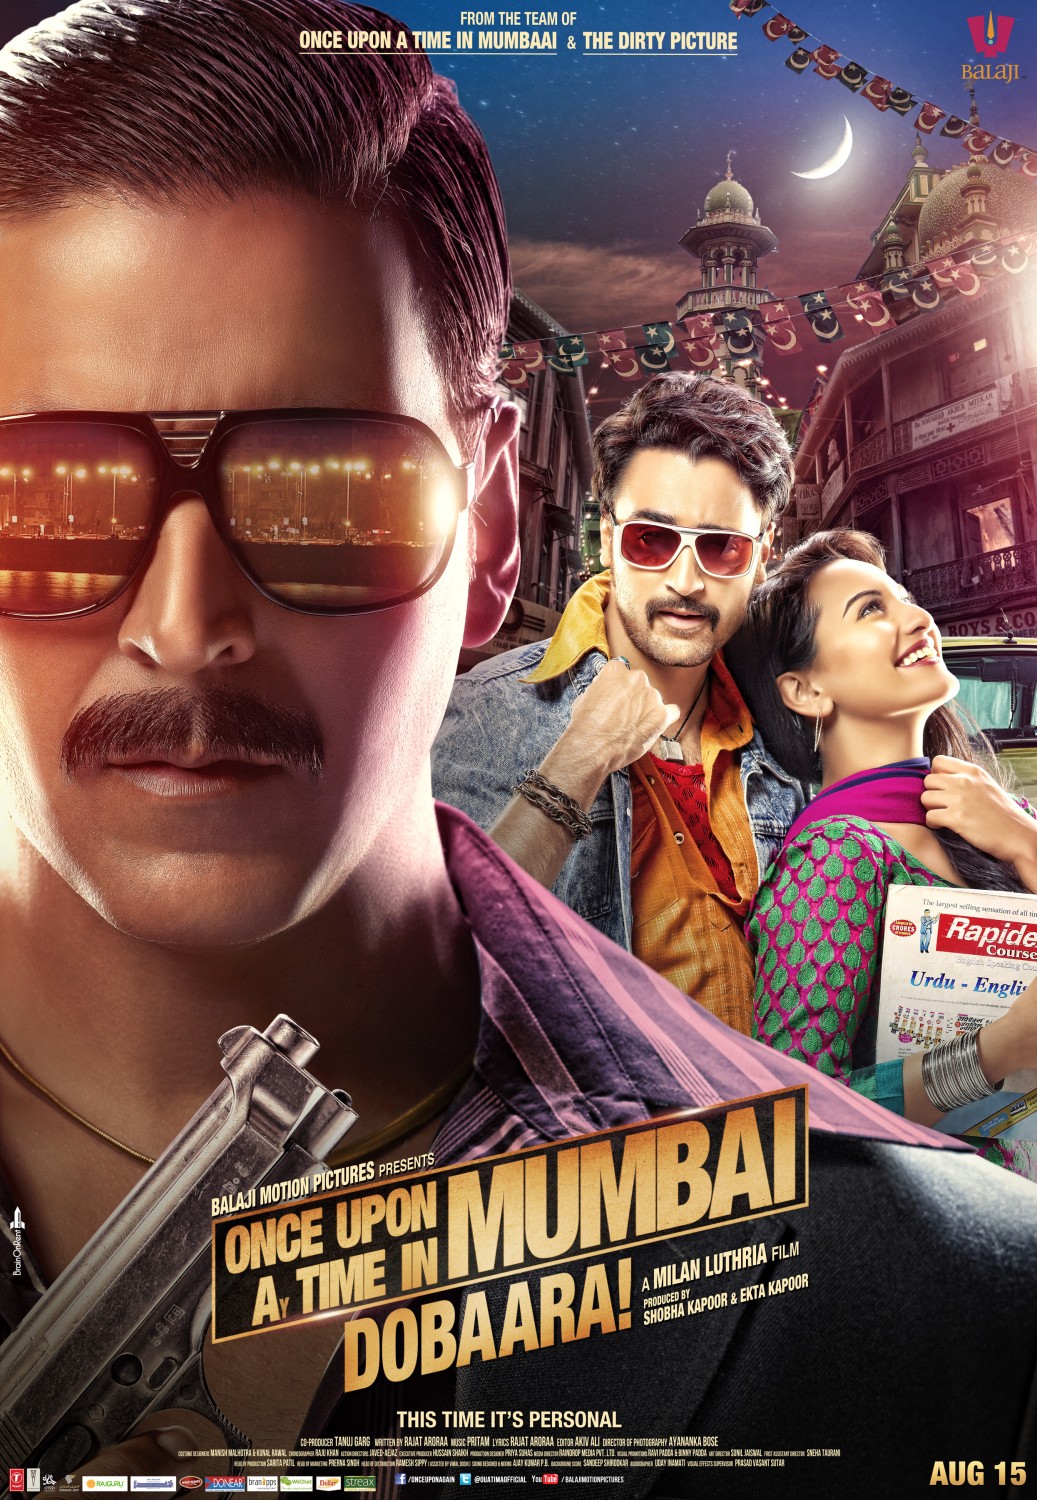 Extra Large Movie Poster Image for Once Upon a Time in Mumbai Dobaara! (#7 of 11)